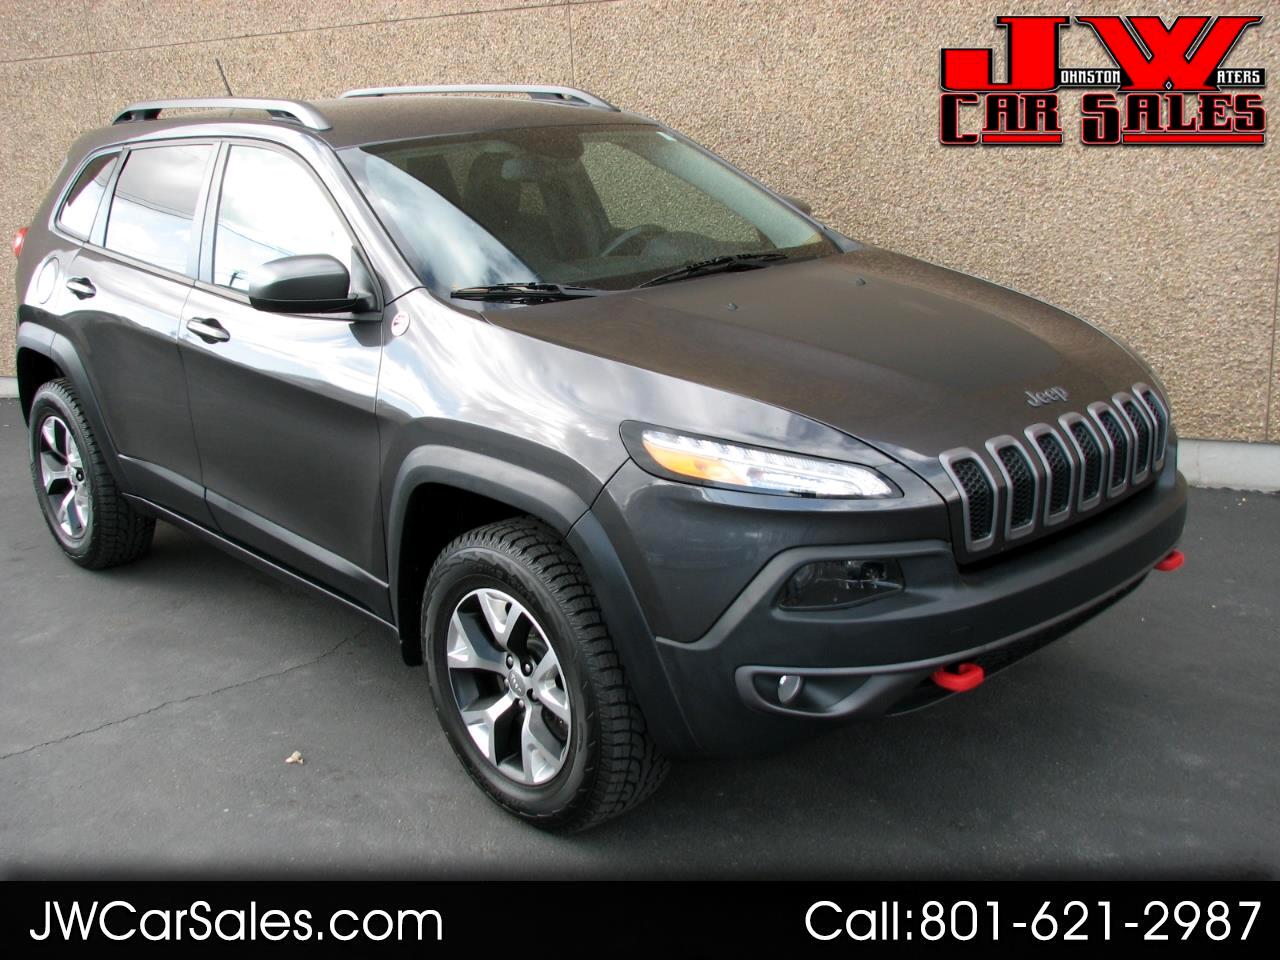 Used 2015 Jeep Cherokee Trailhawk 4WD for Sale in Ogden UT